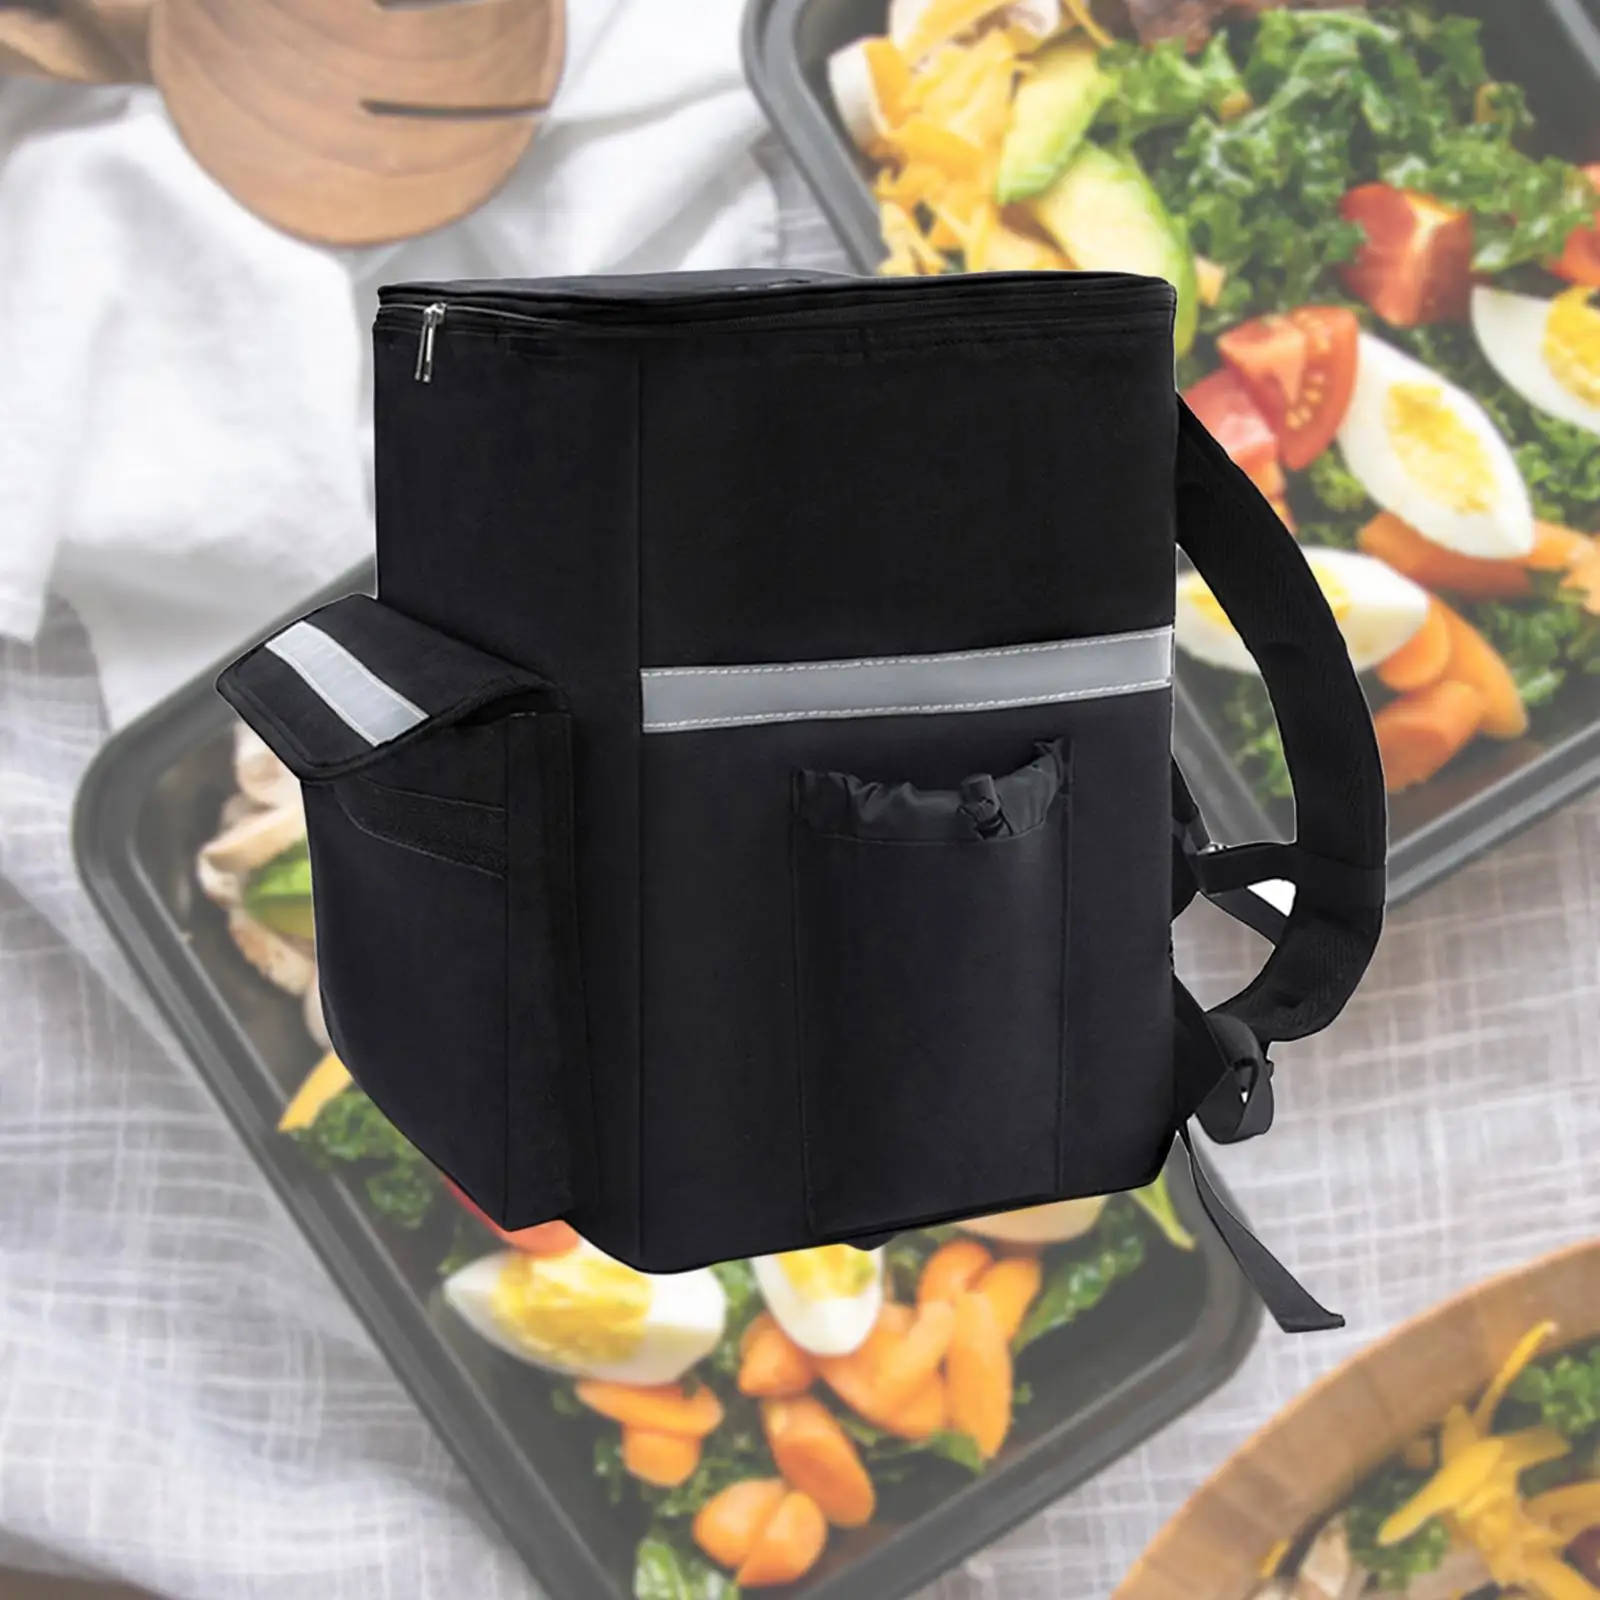 delivery Backpack Thickened Insulated Thermal Catering Bag Waterproof coolers Bag for Camping Outdoor Home Travel Beach